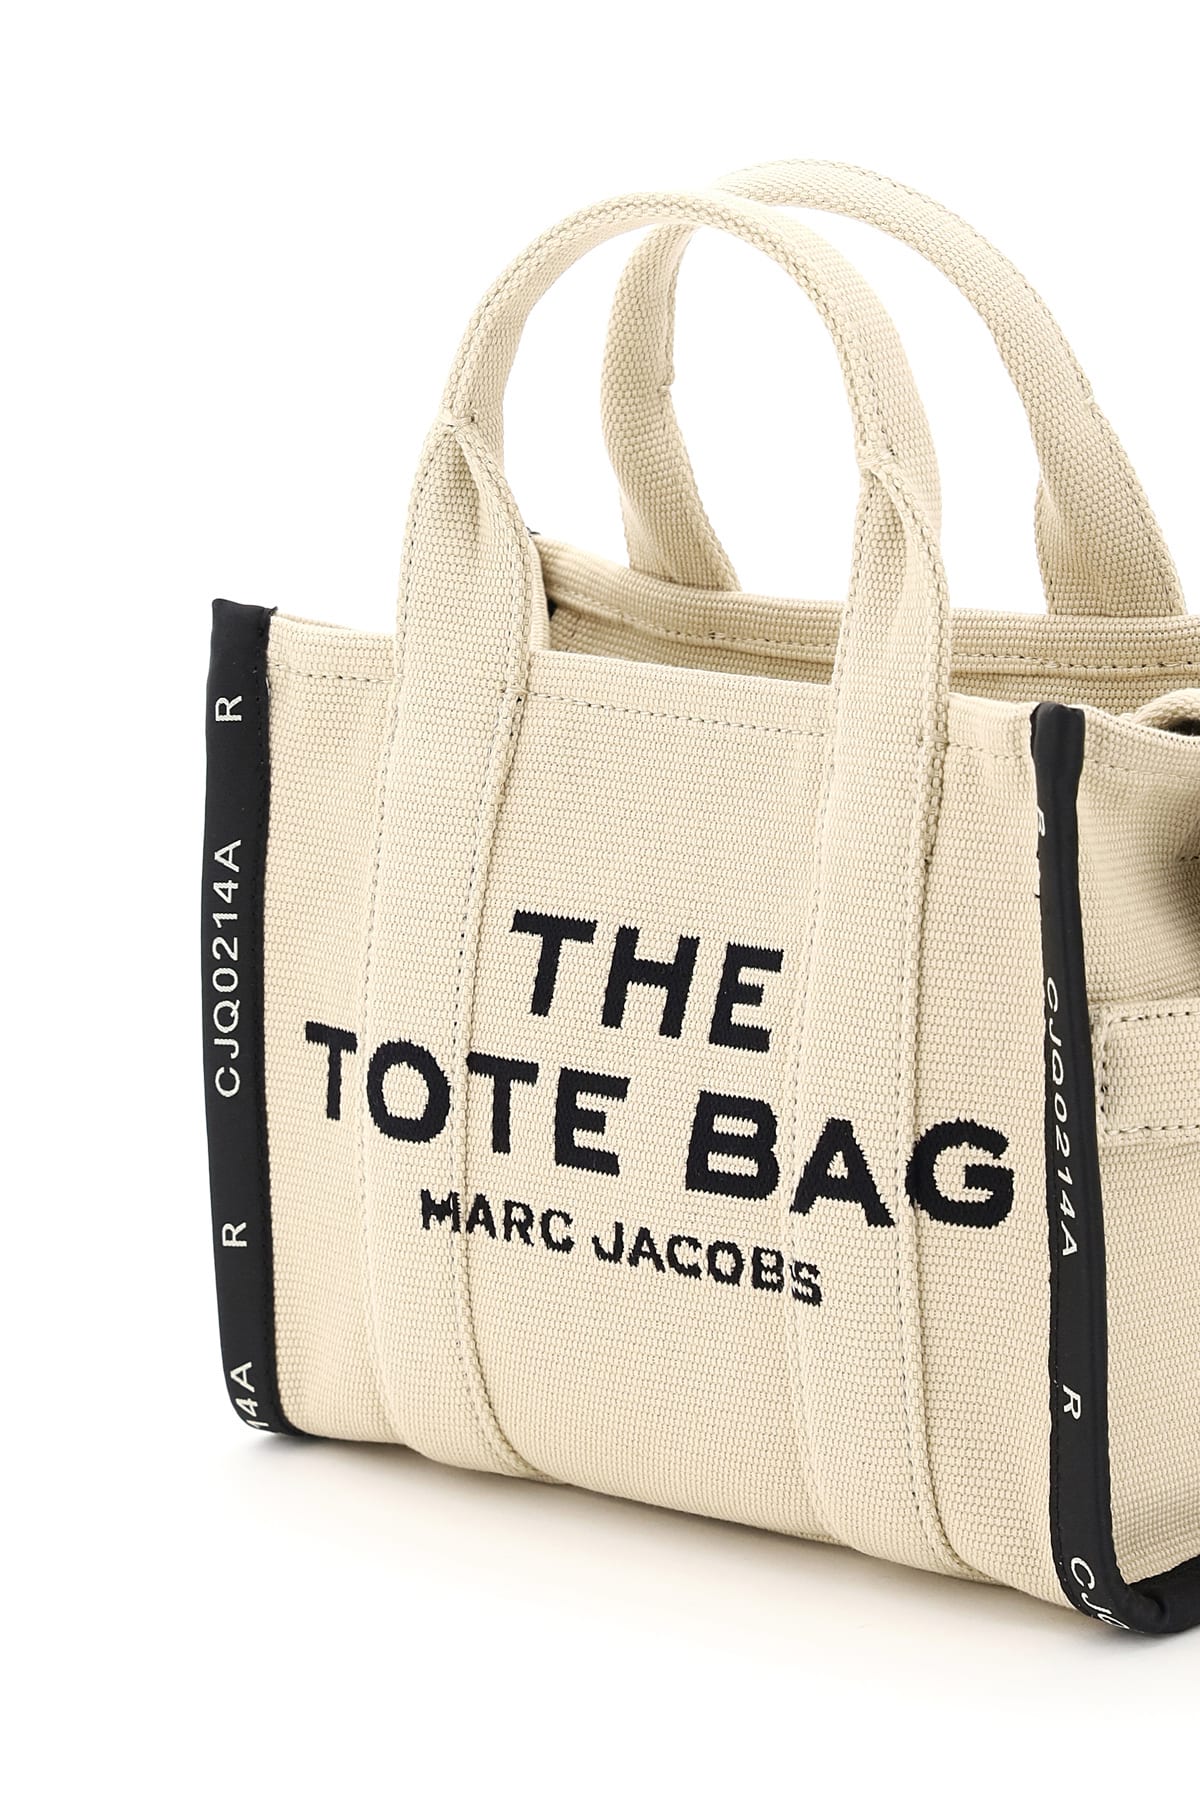 MARC JACOBS: The Tote Bag in canvas with embroidered logo - Camel